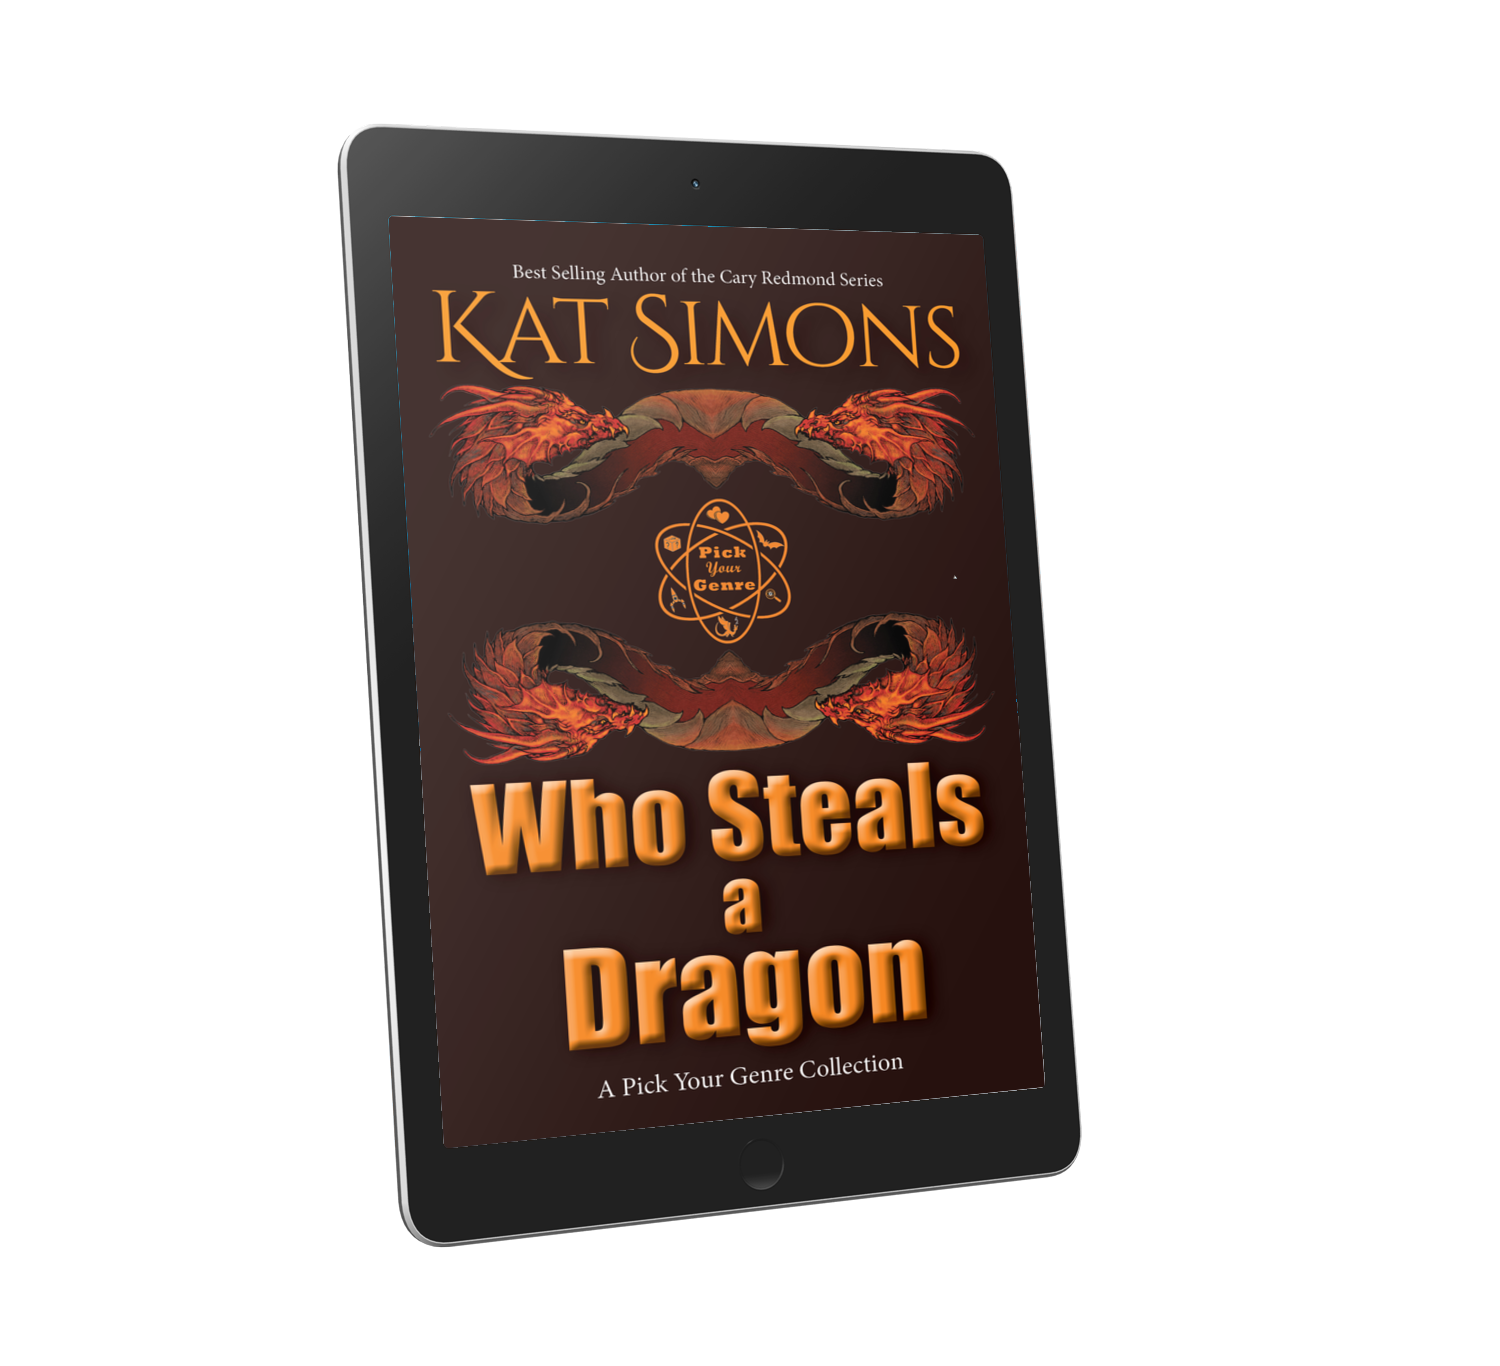 cover art for Who Steals a Dragon with a dark background, large title in orange at bottom, author name in orange at top, and two abstract, two headed dragon images in the middle; also includes the Pick Your Genre Logo in orange